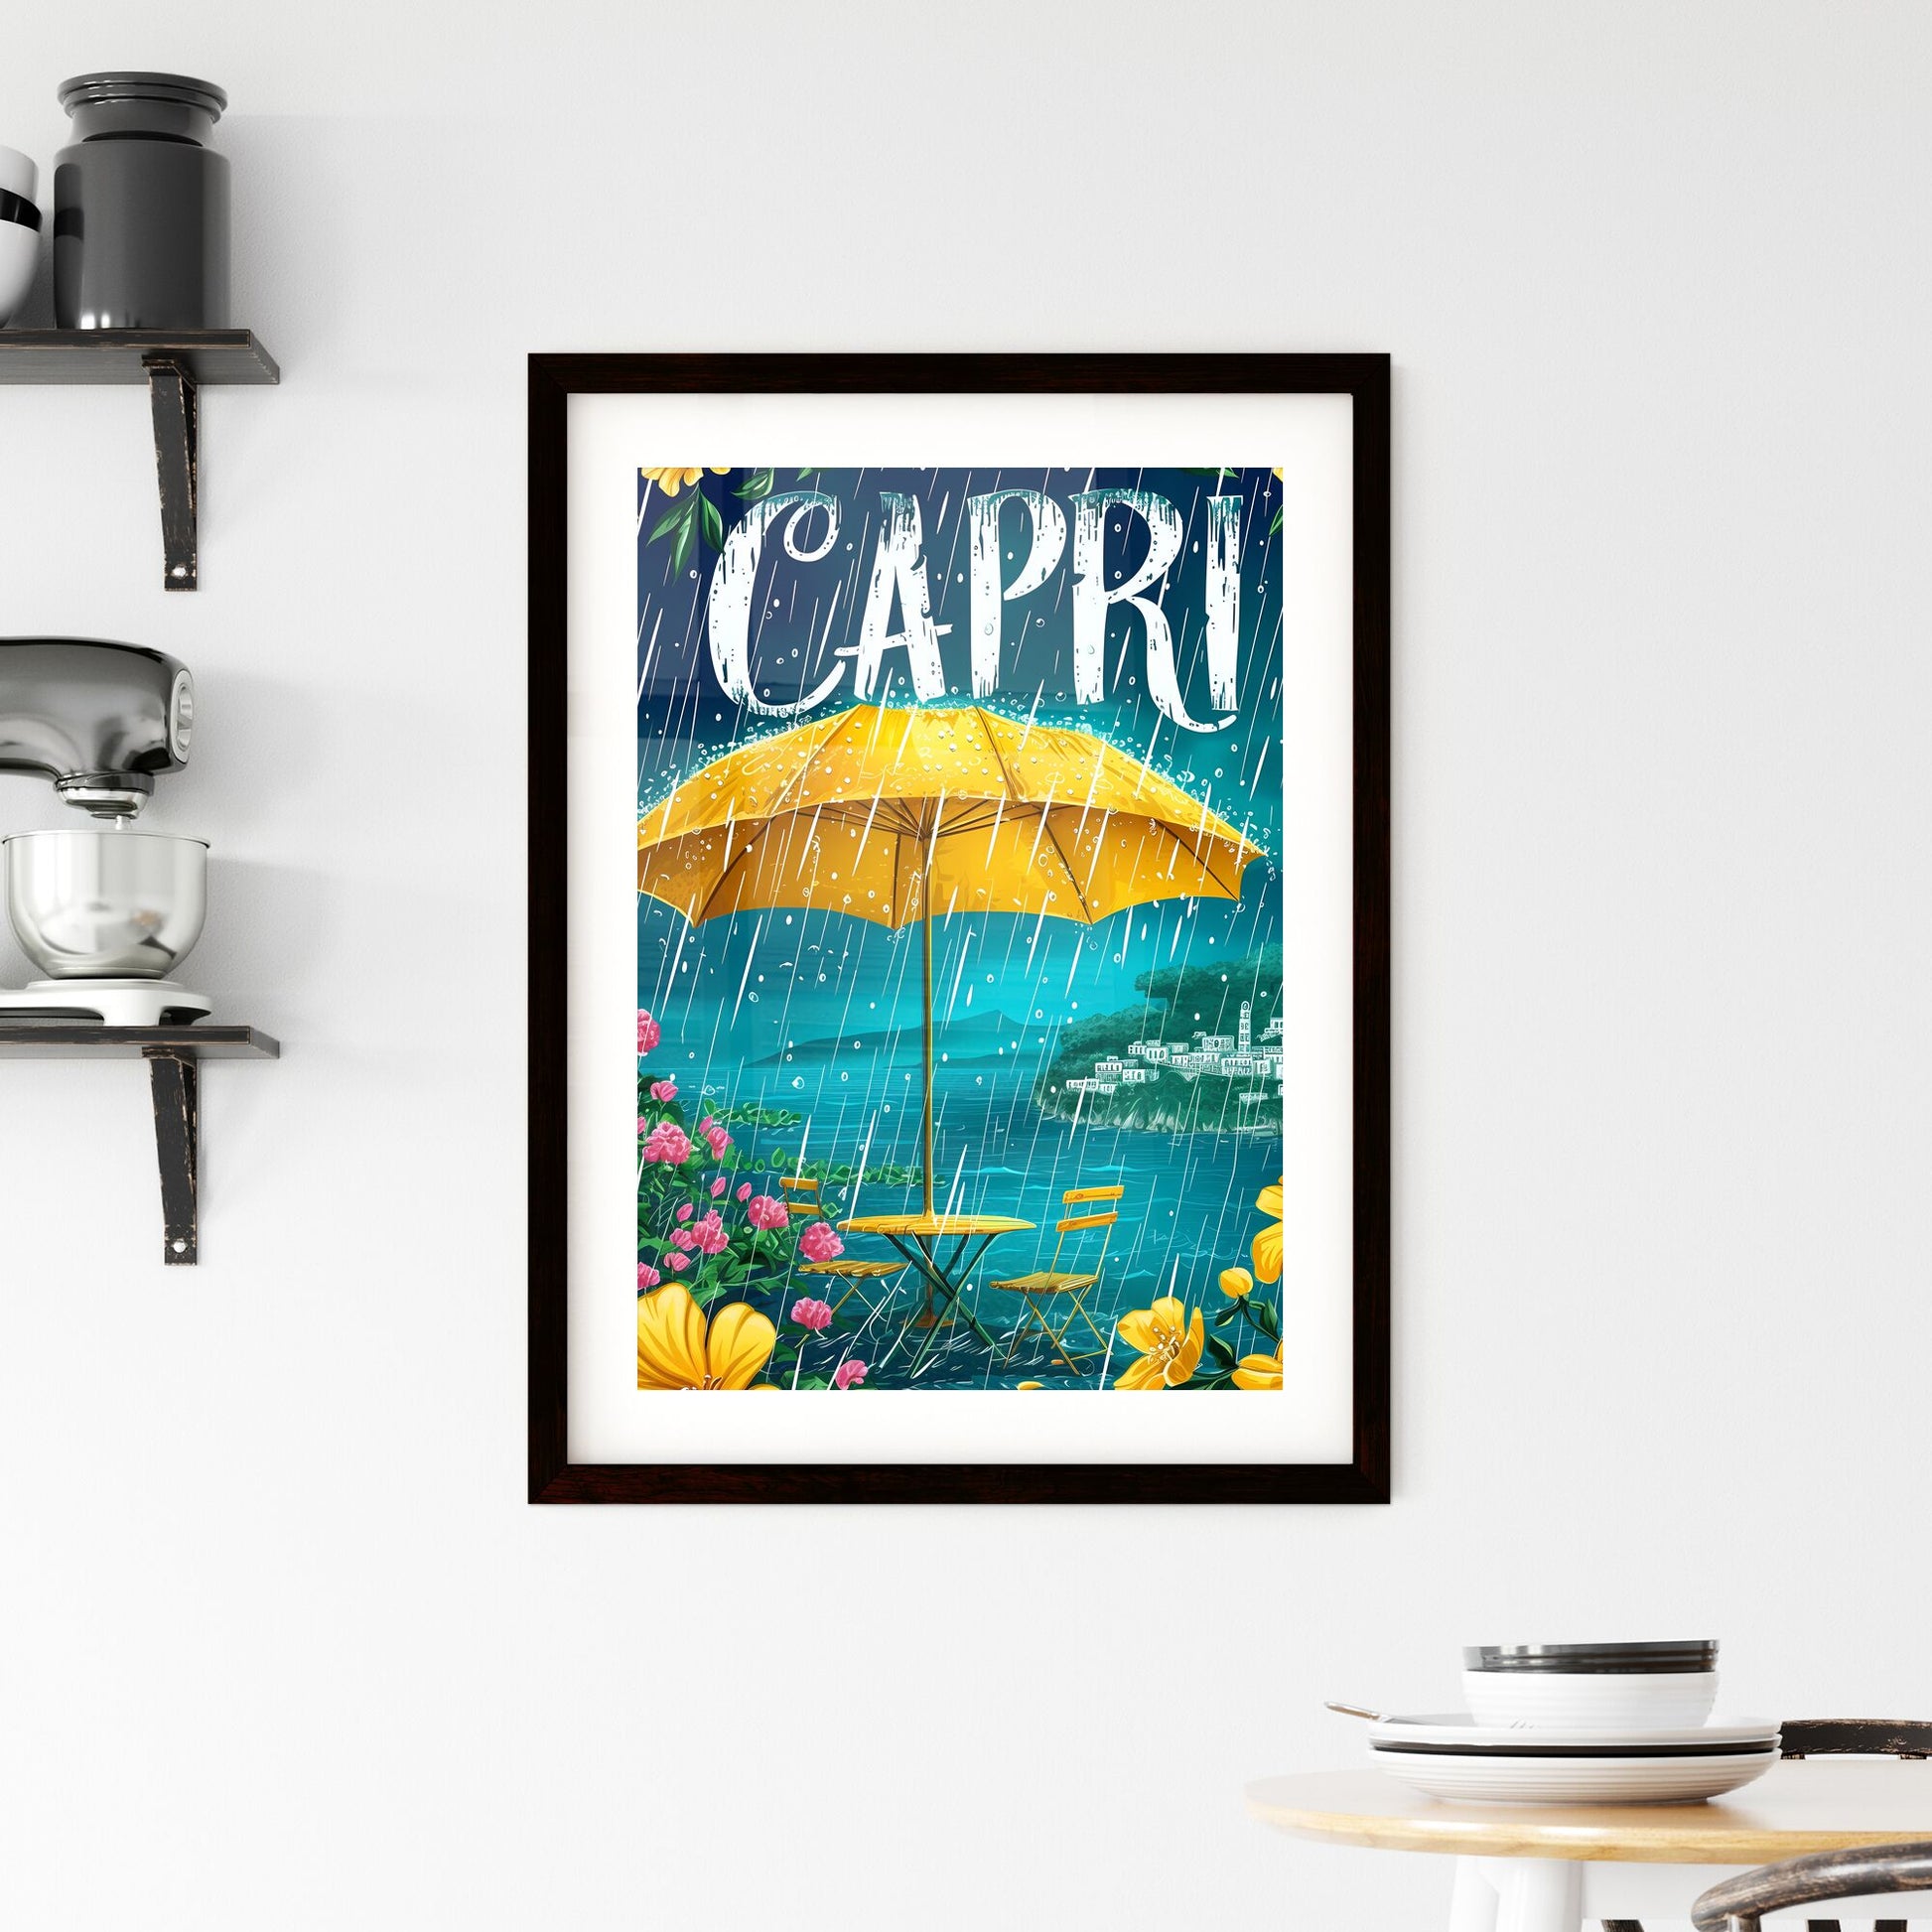 Capri Italy poster with text CAPRI in bodony font - Art print of a poster of a rainy day Default Title